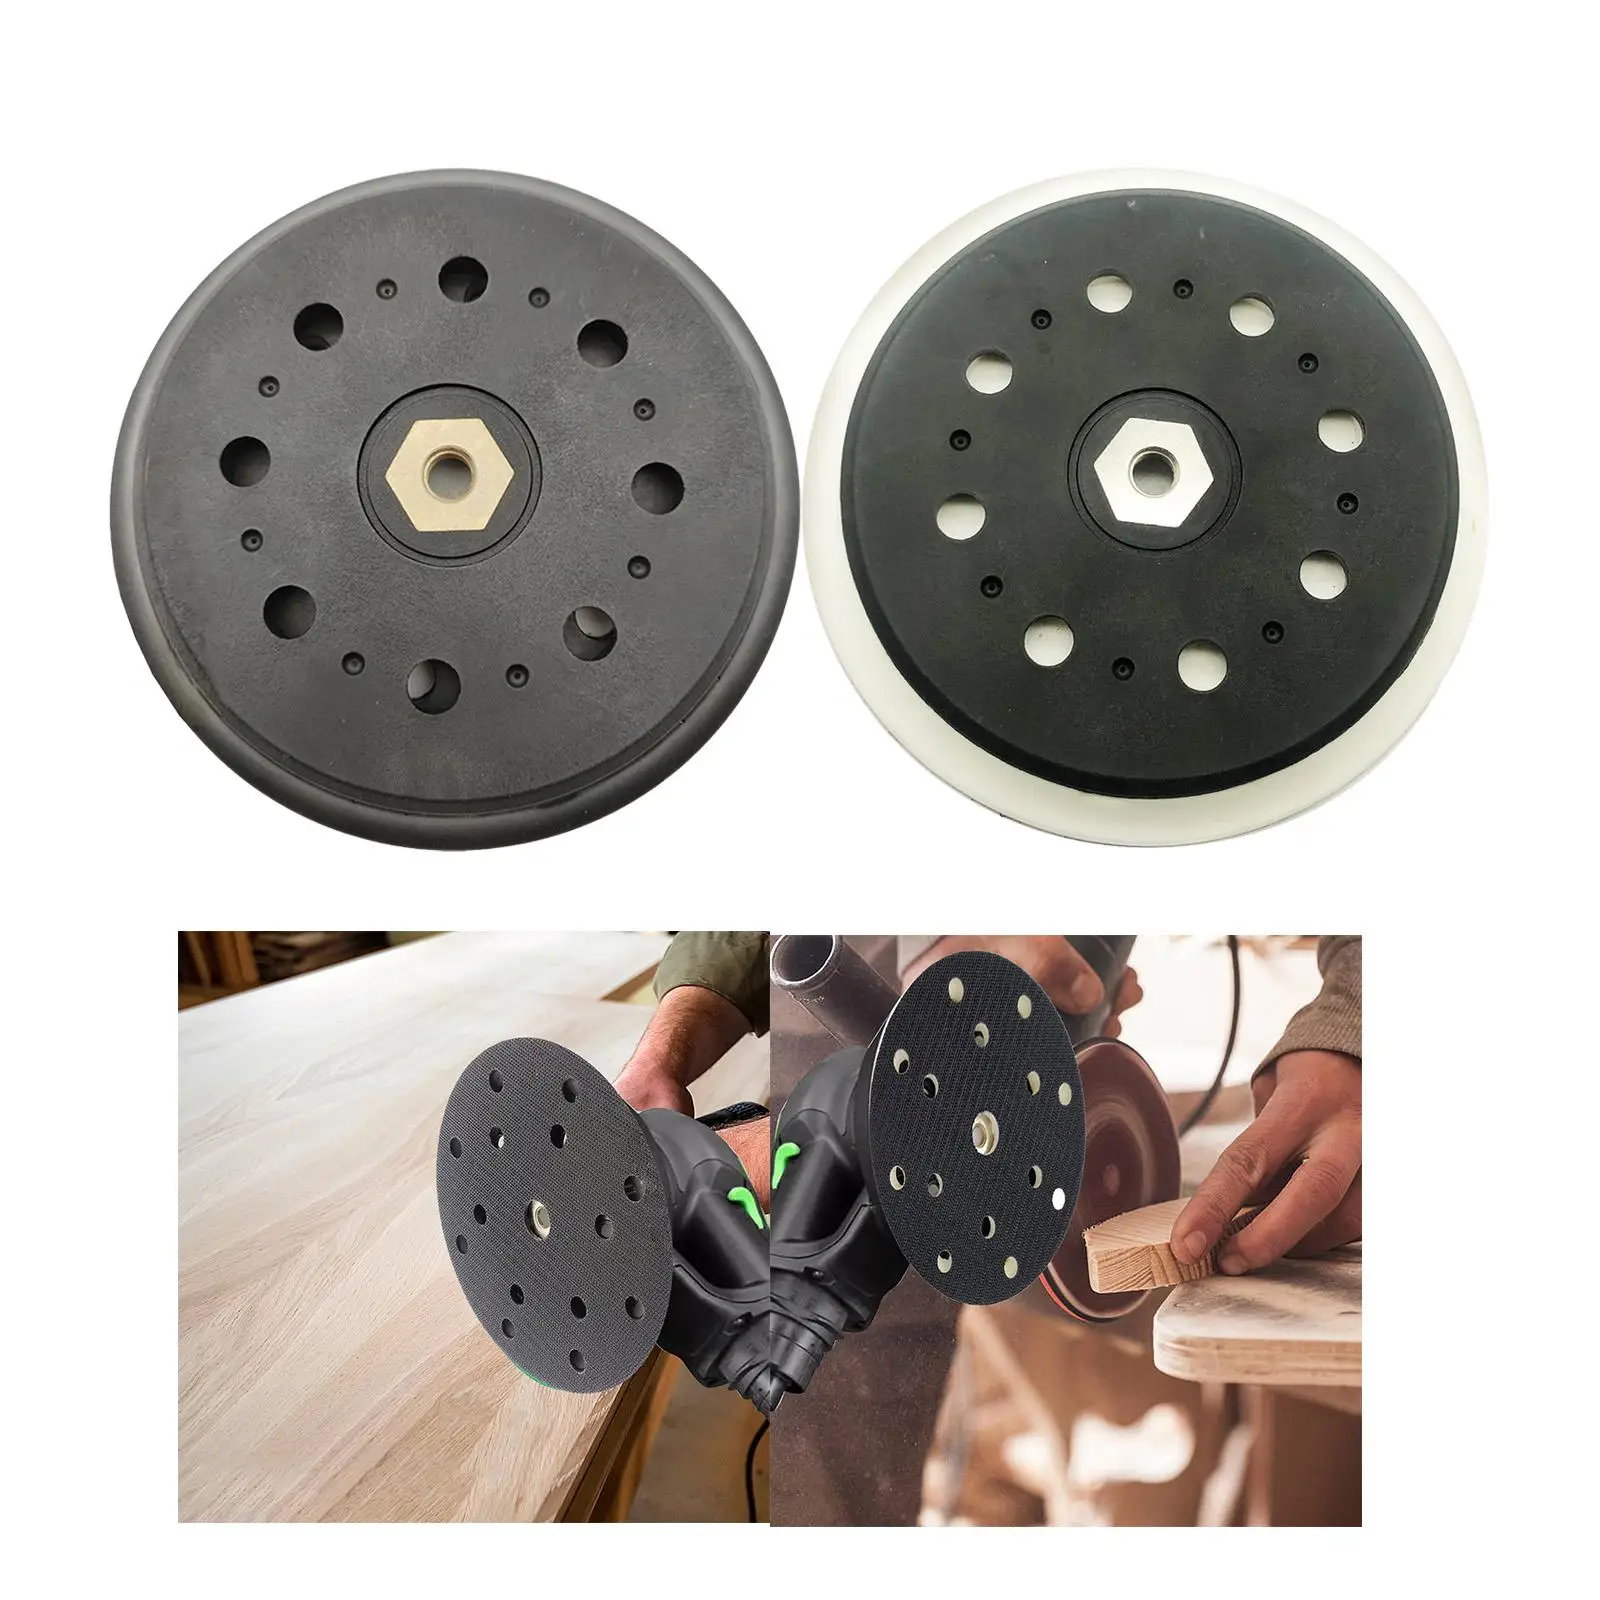 15 Hole Sanding Disc Pad 6 inch for Orbit Sander Ventilation Abrasive Tools Sander Polisher Tool Replacement for Woodworking